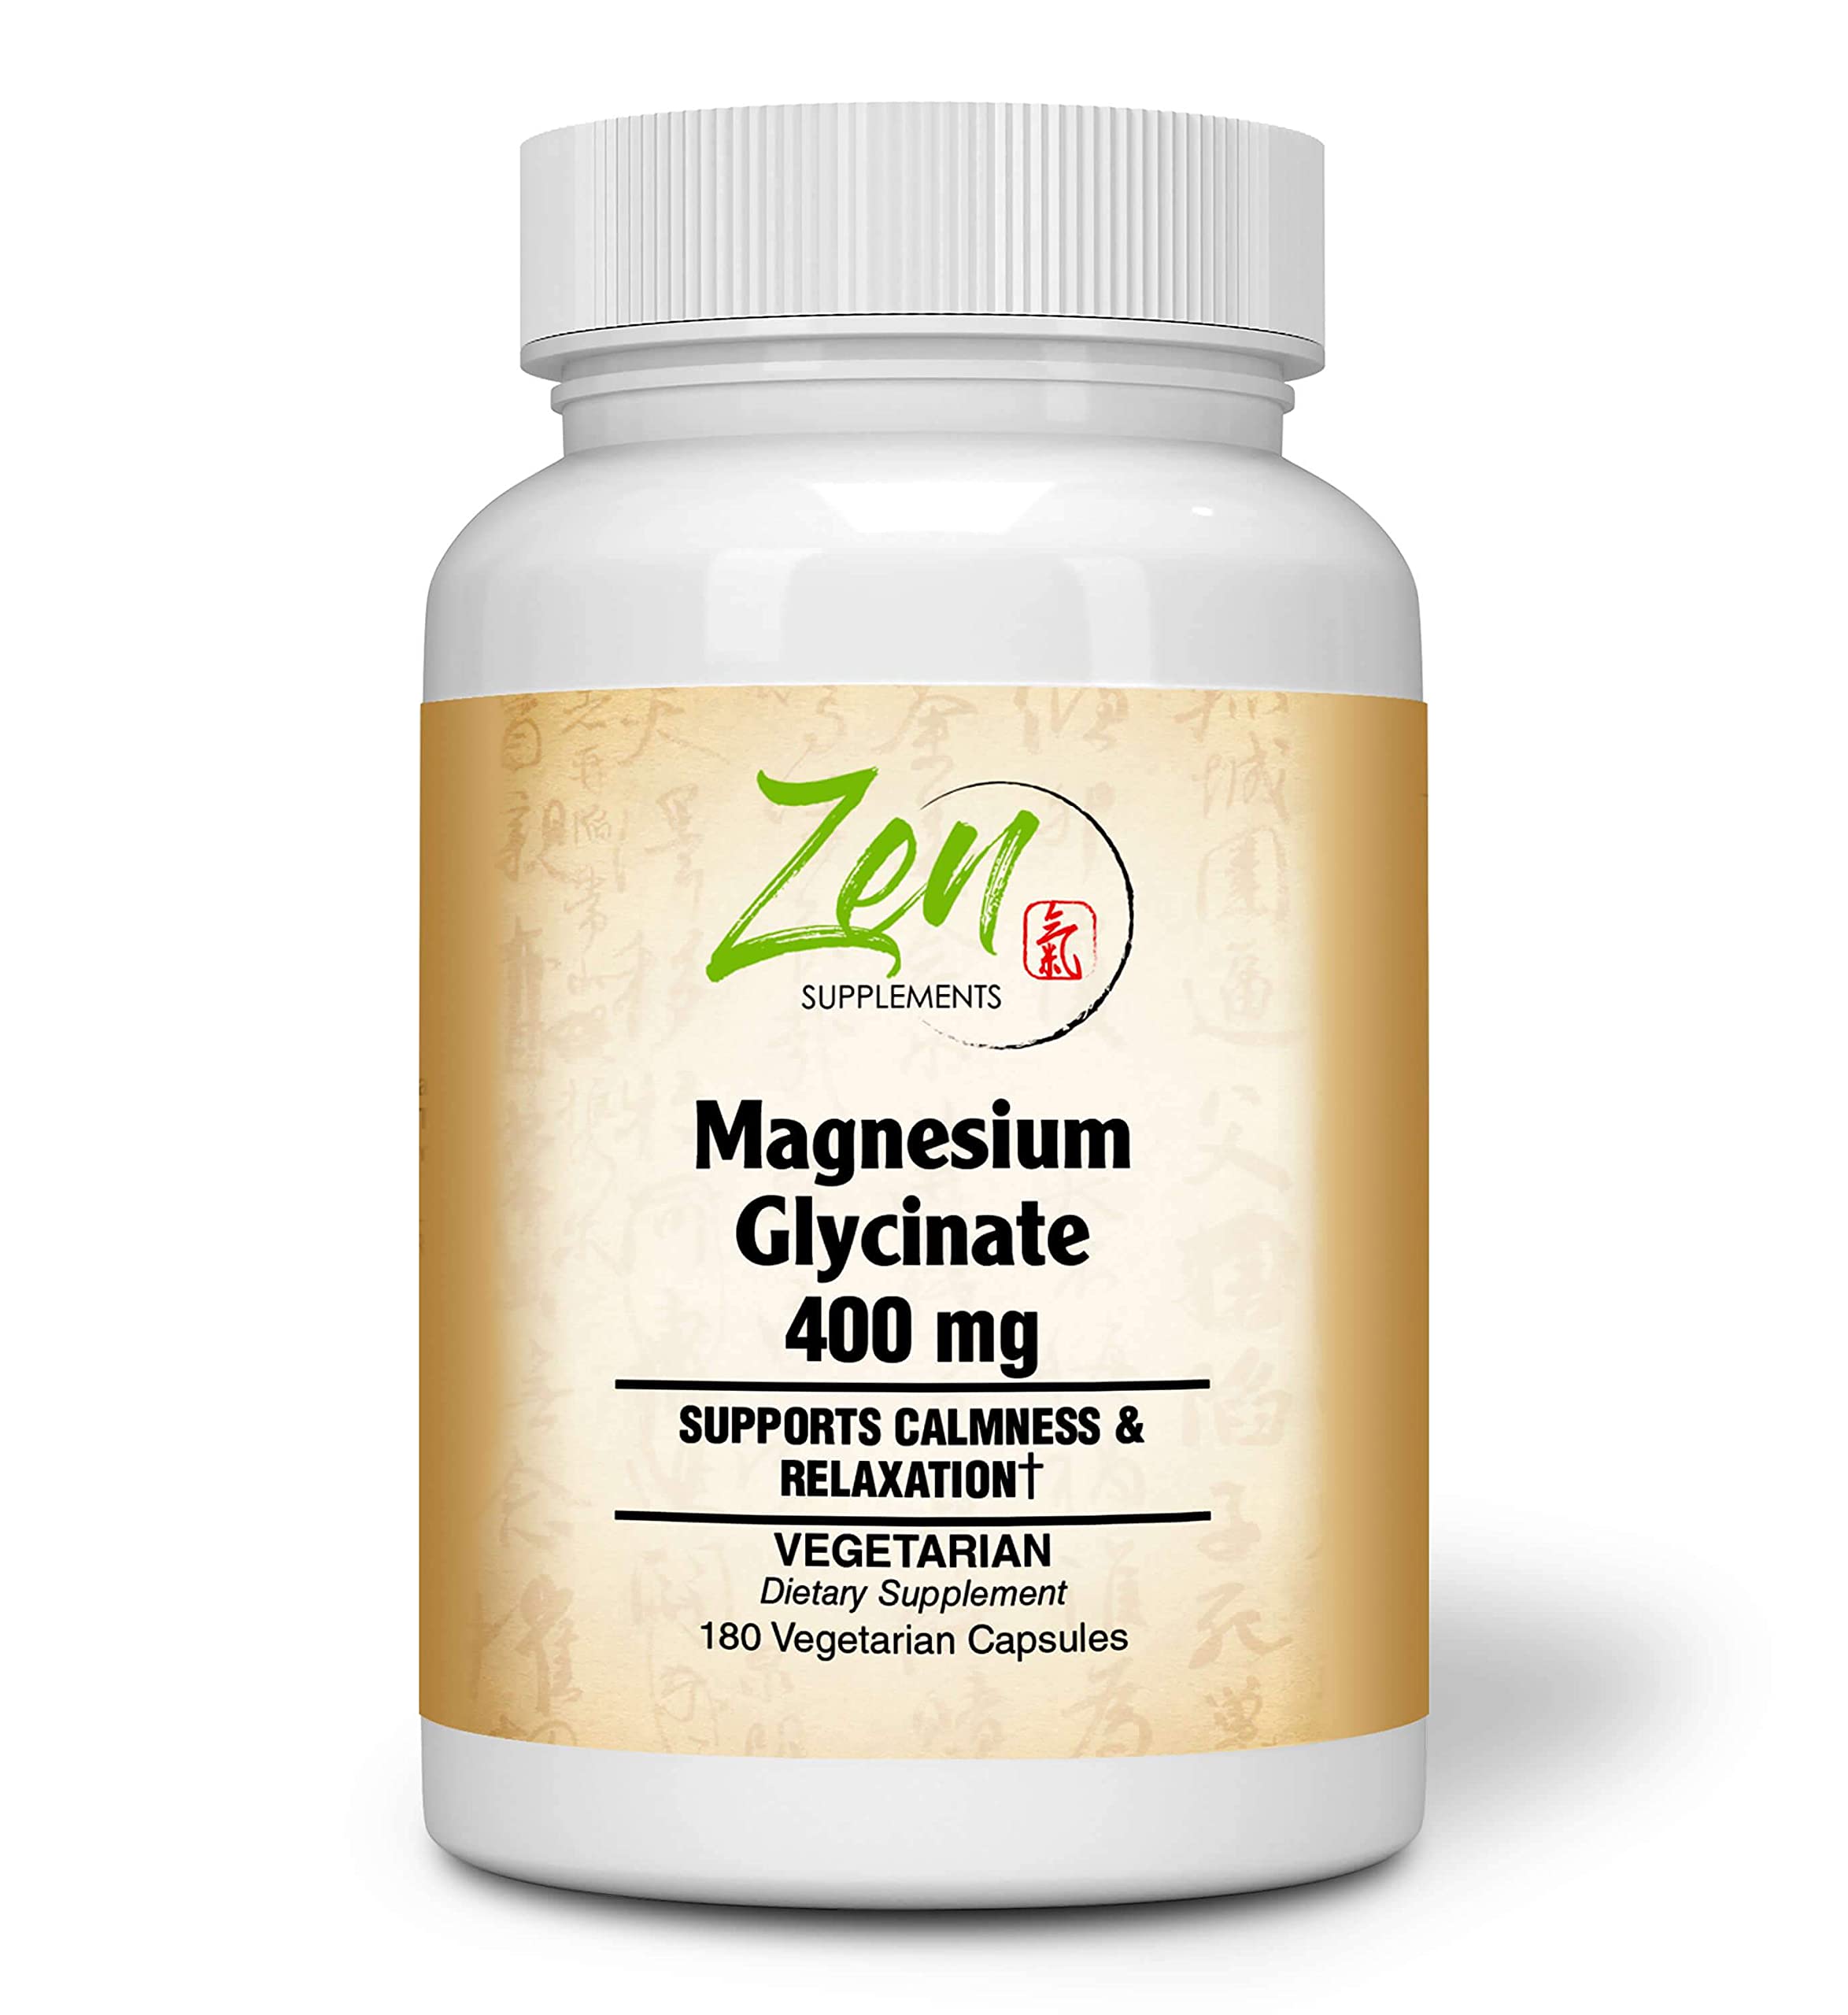 Zen Supplements - Magnesium Glycinate 400Mg - Promotes Calmness & Sleep Quality, Support for Muscle Cramps & Soreness, Heart & Blood Pressure Functions & Blood Sugar Balance 180-Vegcaps